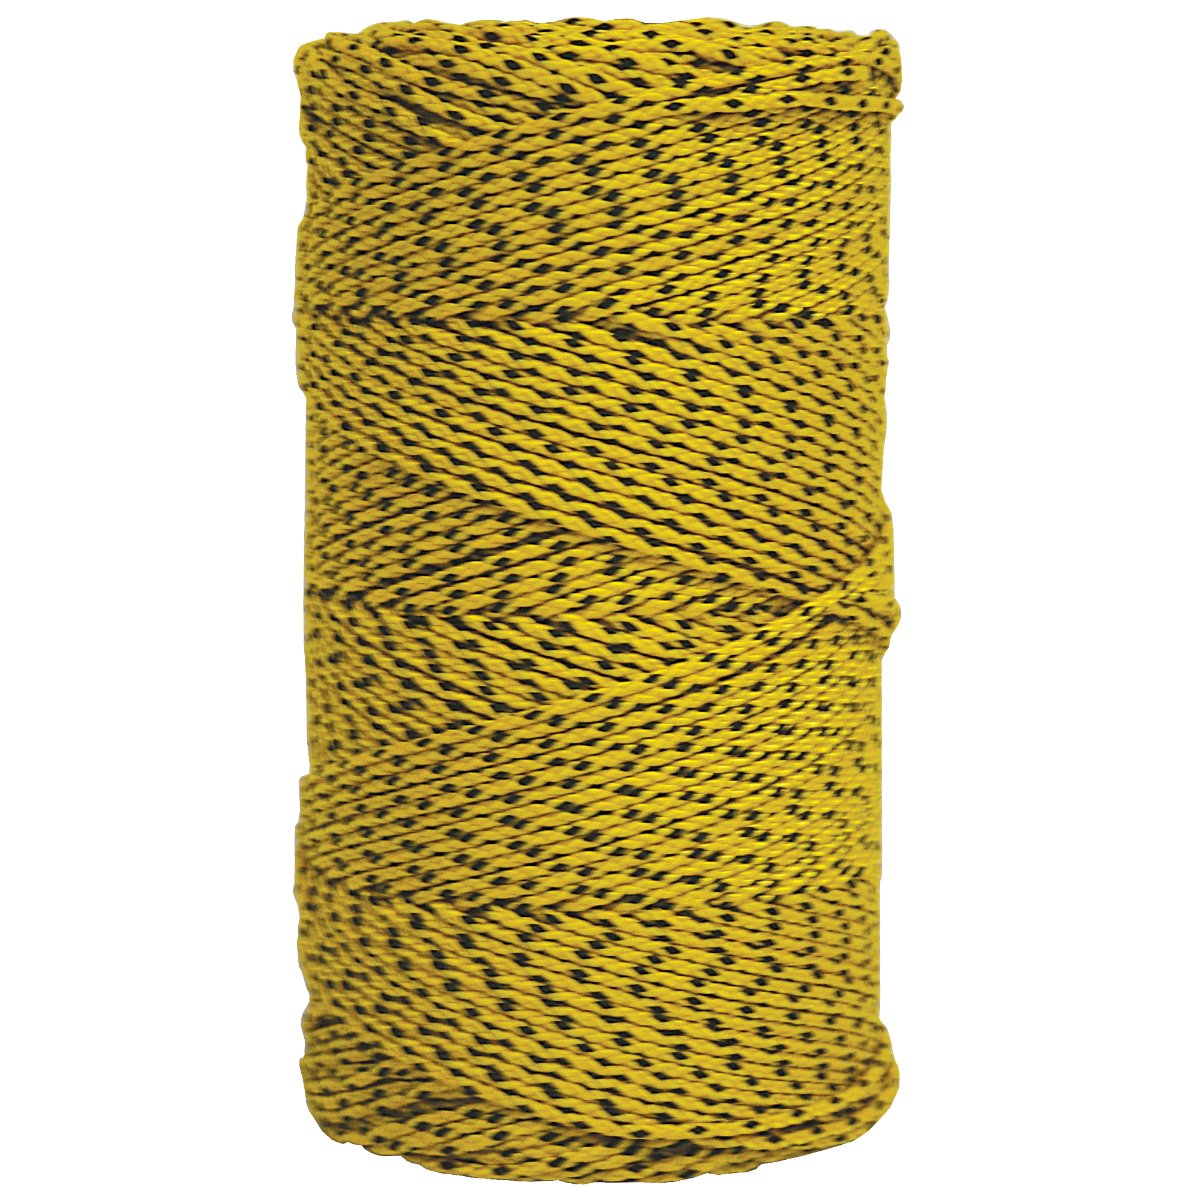 Super Tough Bonded Braided Yellow and Black Bricklayers Line